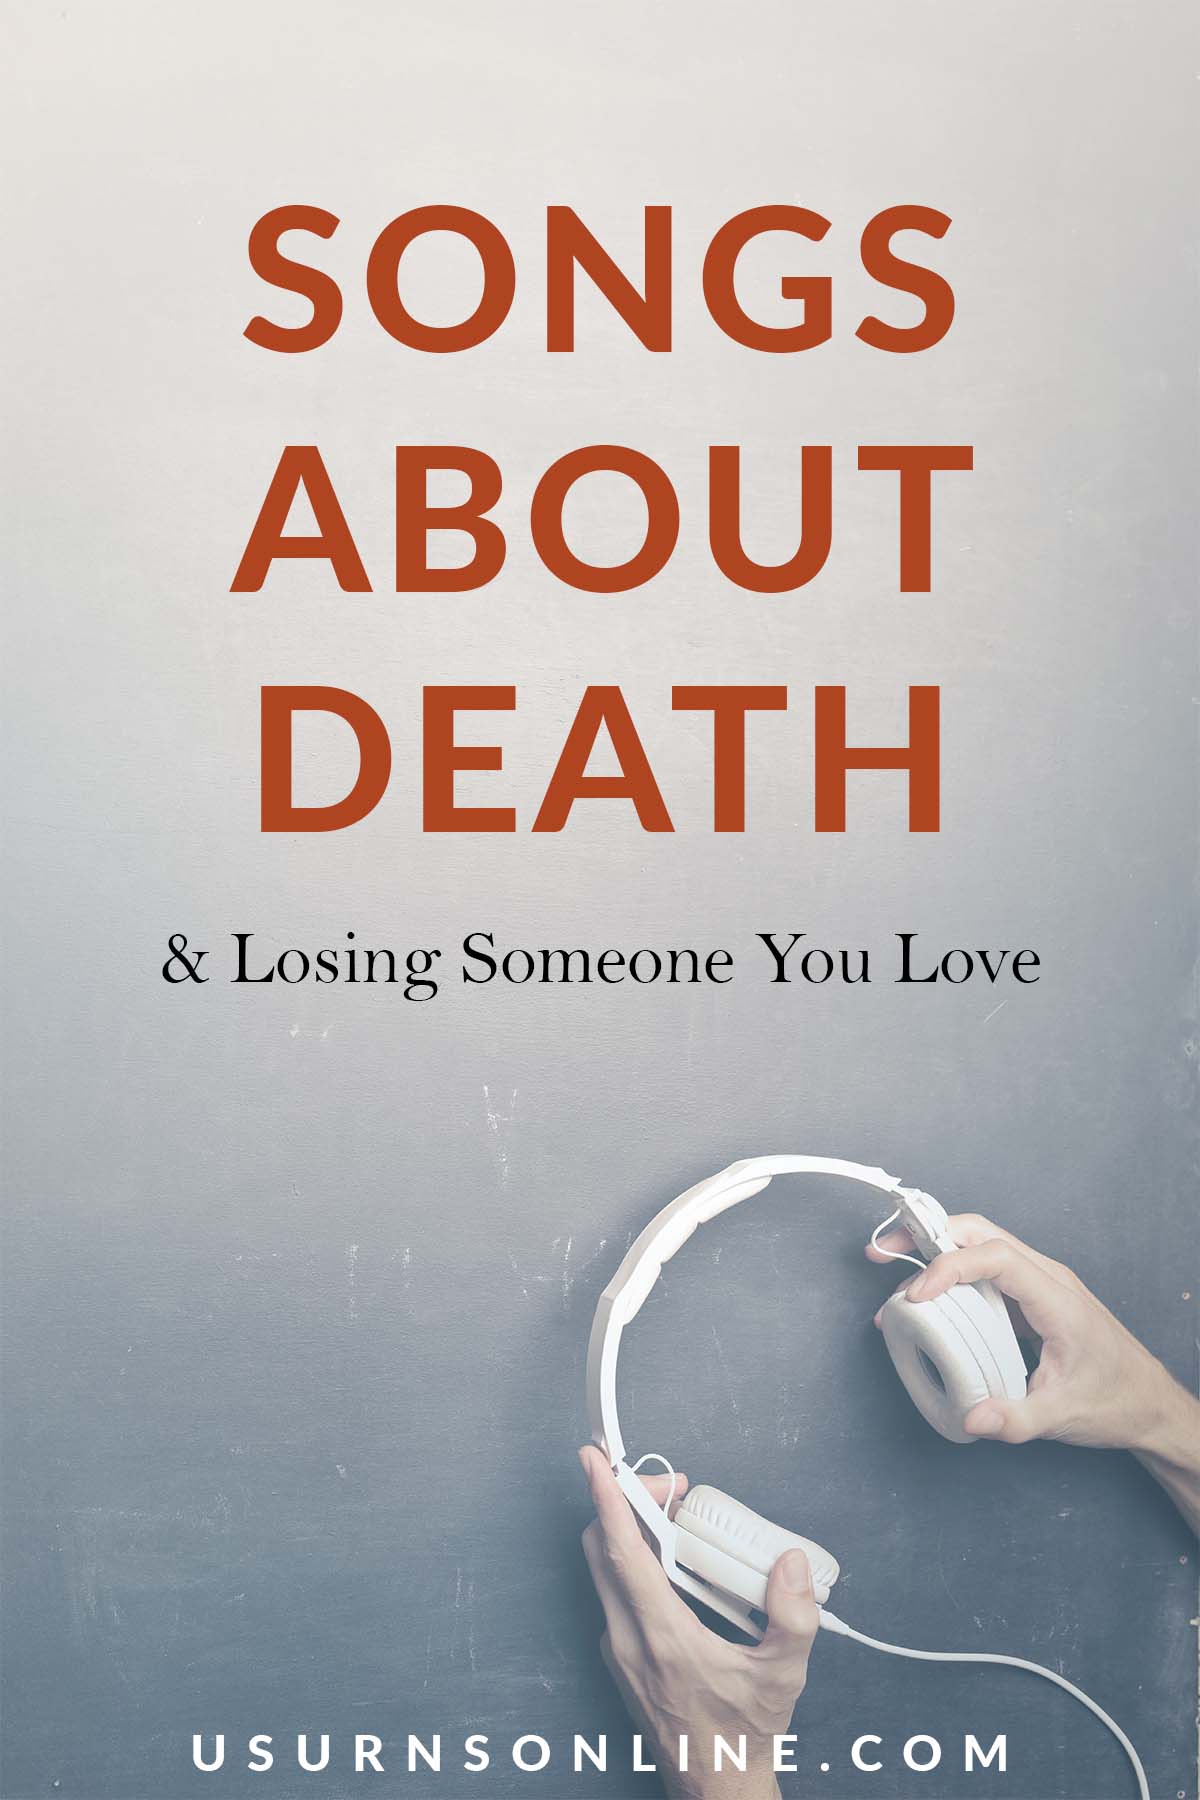 songs about death - feat image